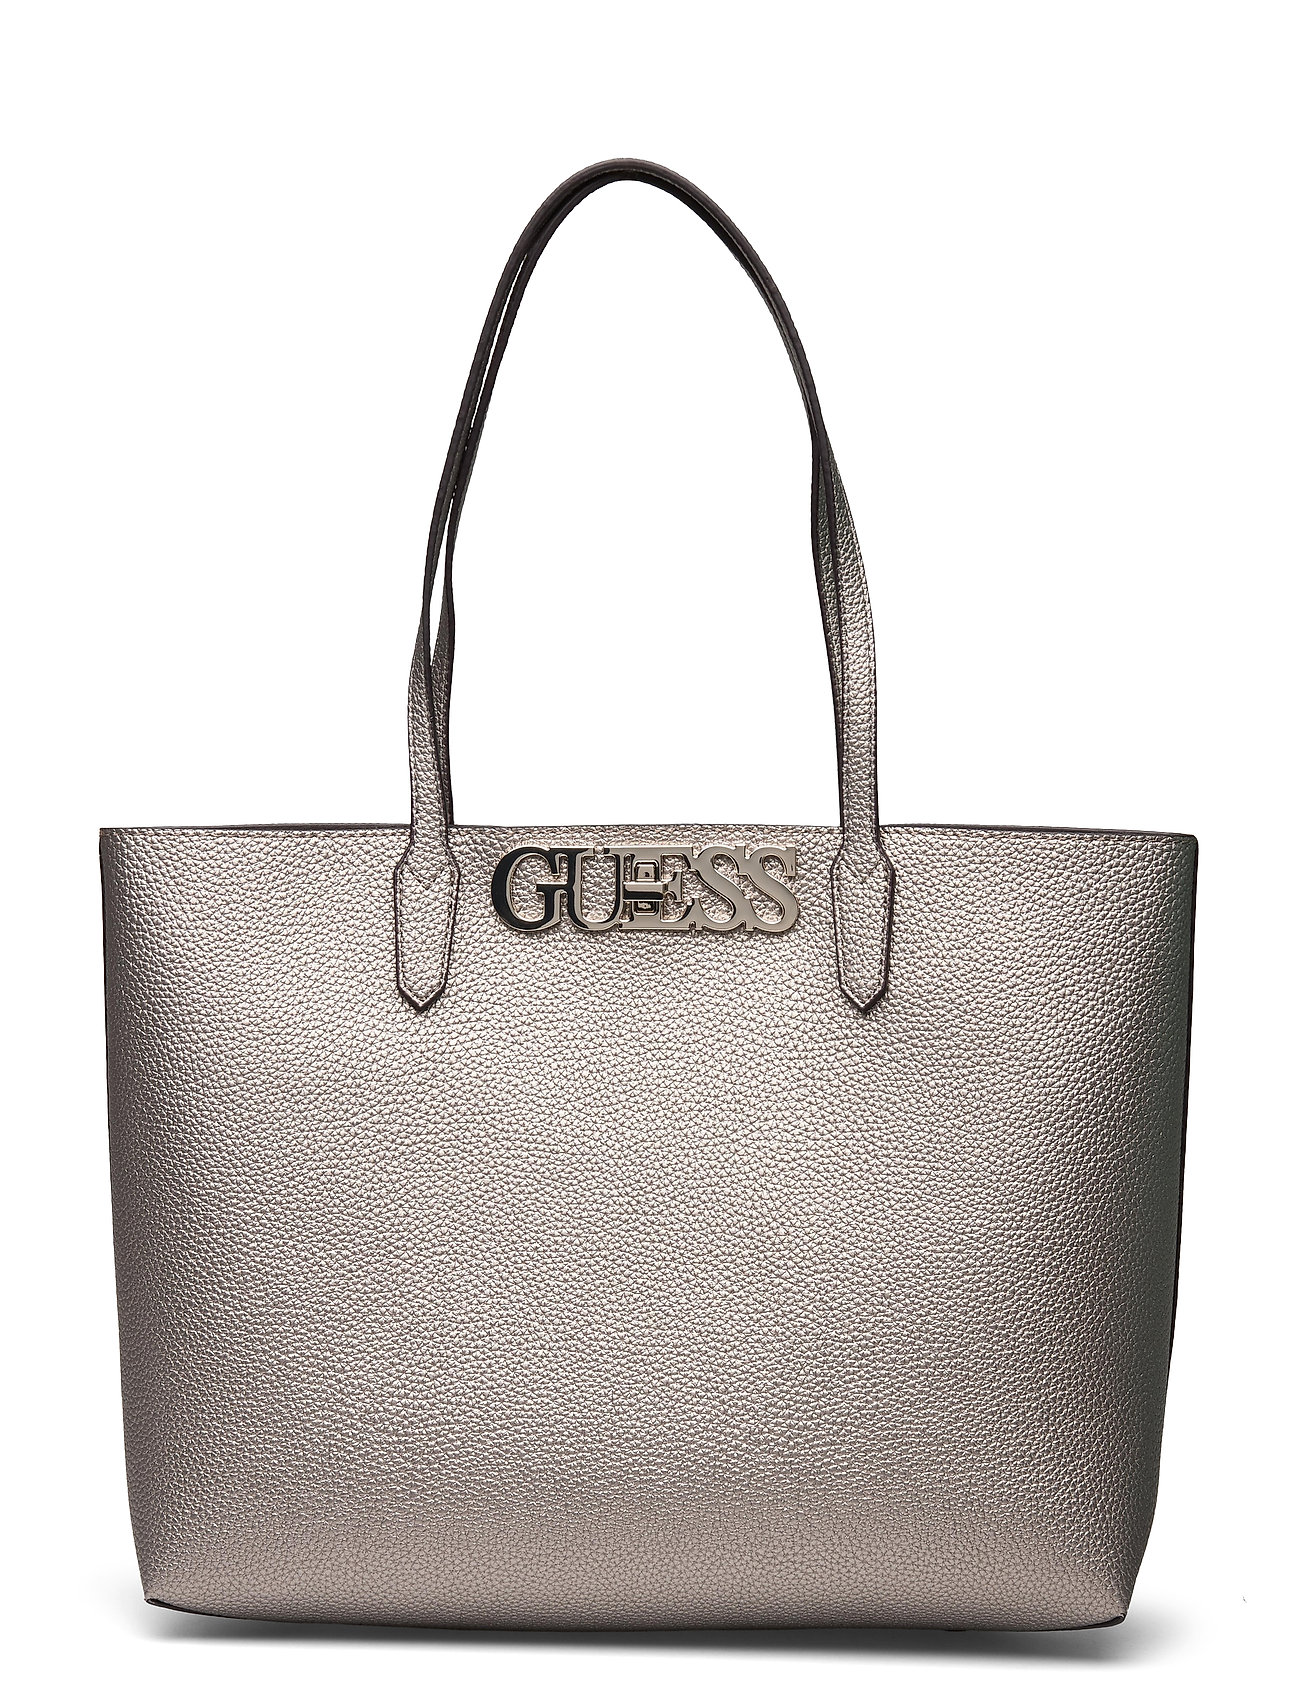 GUESS shopper tasker – Uptown Chic Barcelona Tote Bags Shoppers